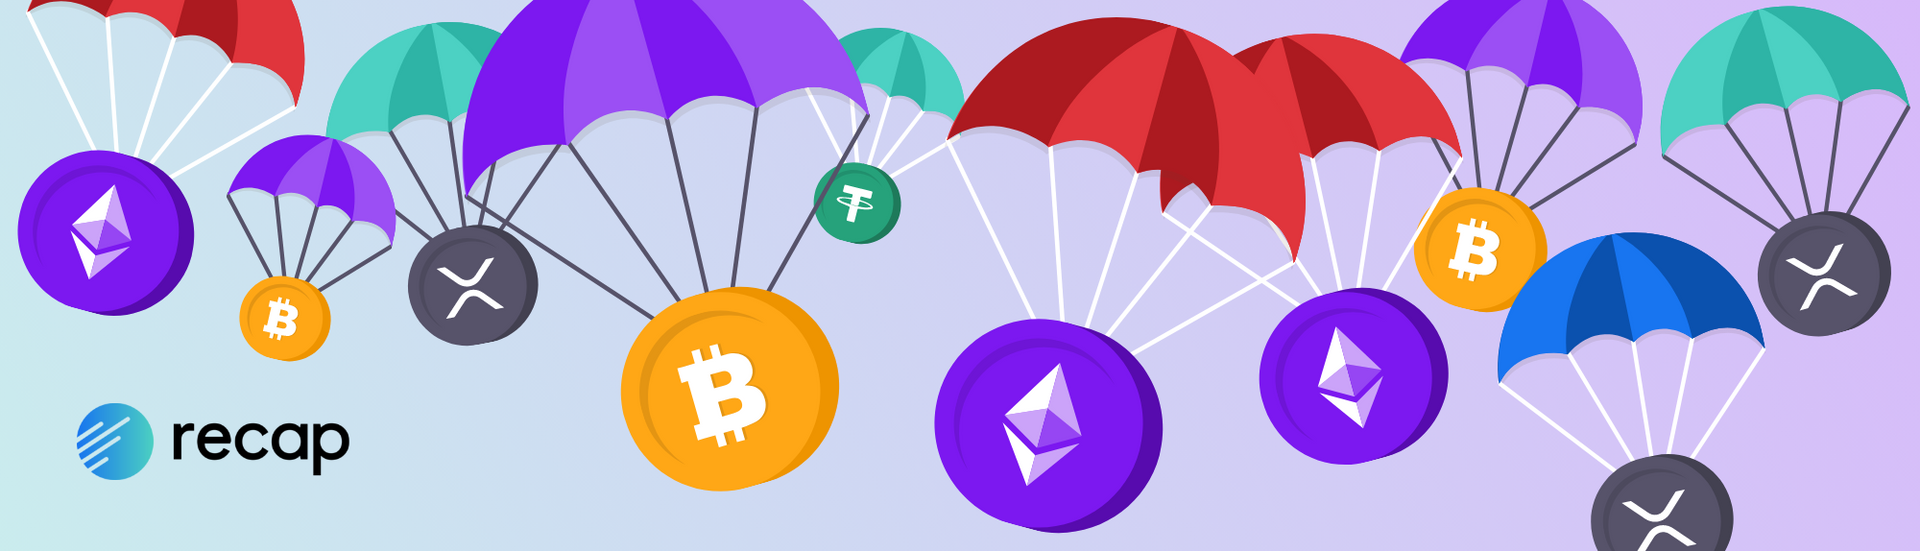 Illustration of lots of colourful parachutes carrying crypto tokens falling through the sky representing airdrops